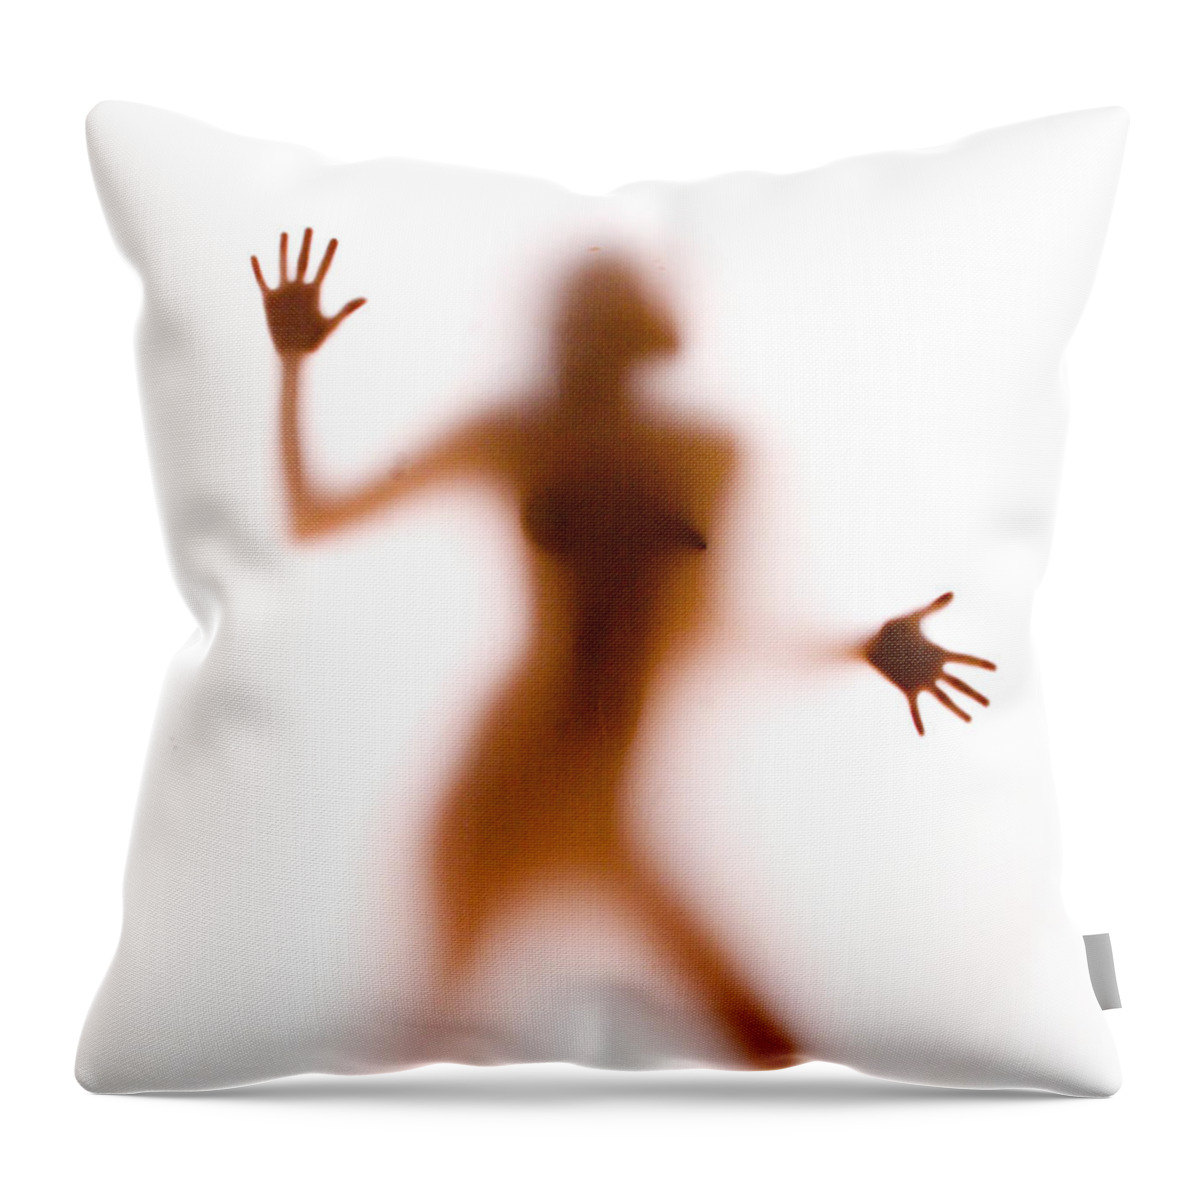 Silhouette Throw Pillow featuring the photograph Silhouette 14 by Michael Fryd